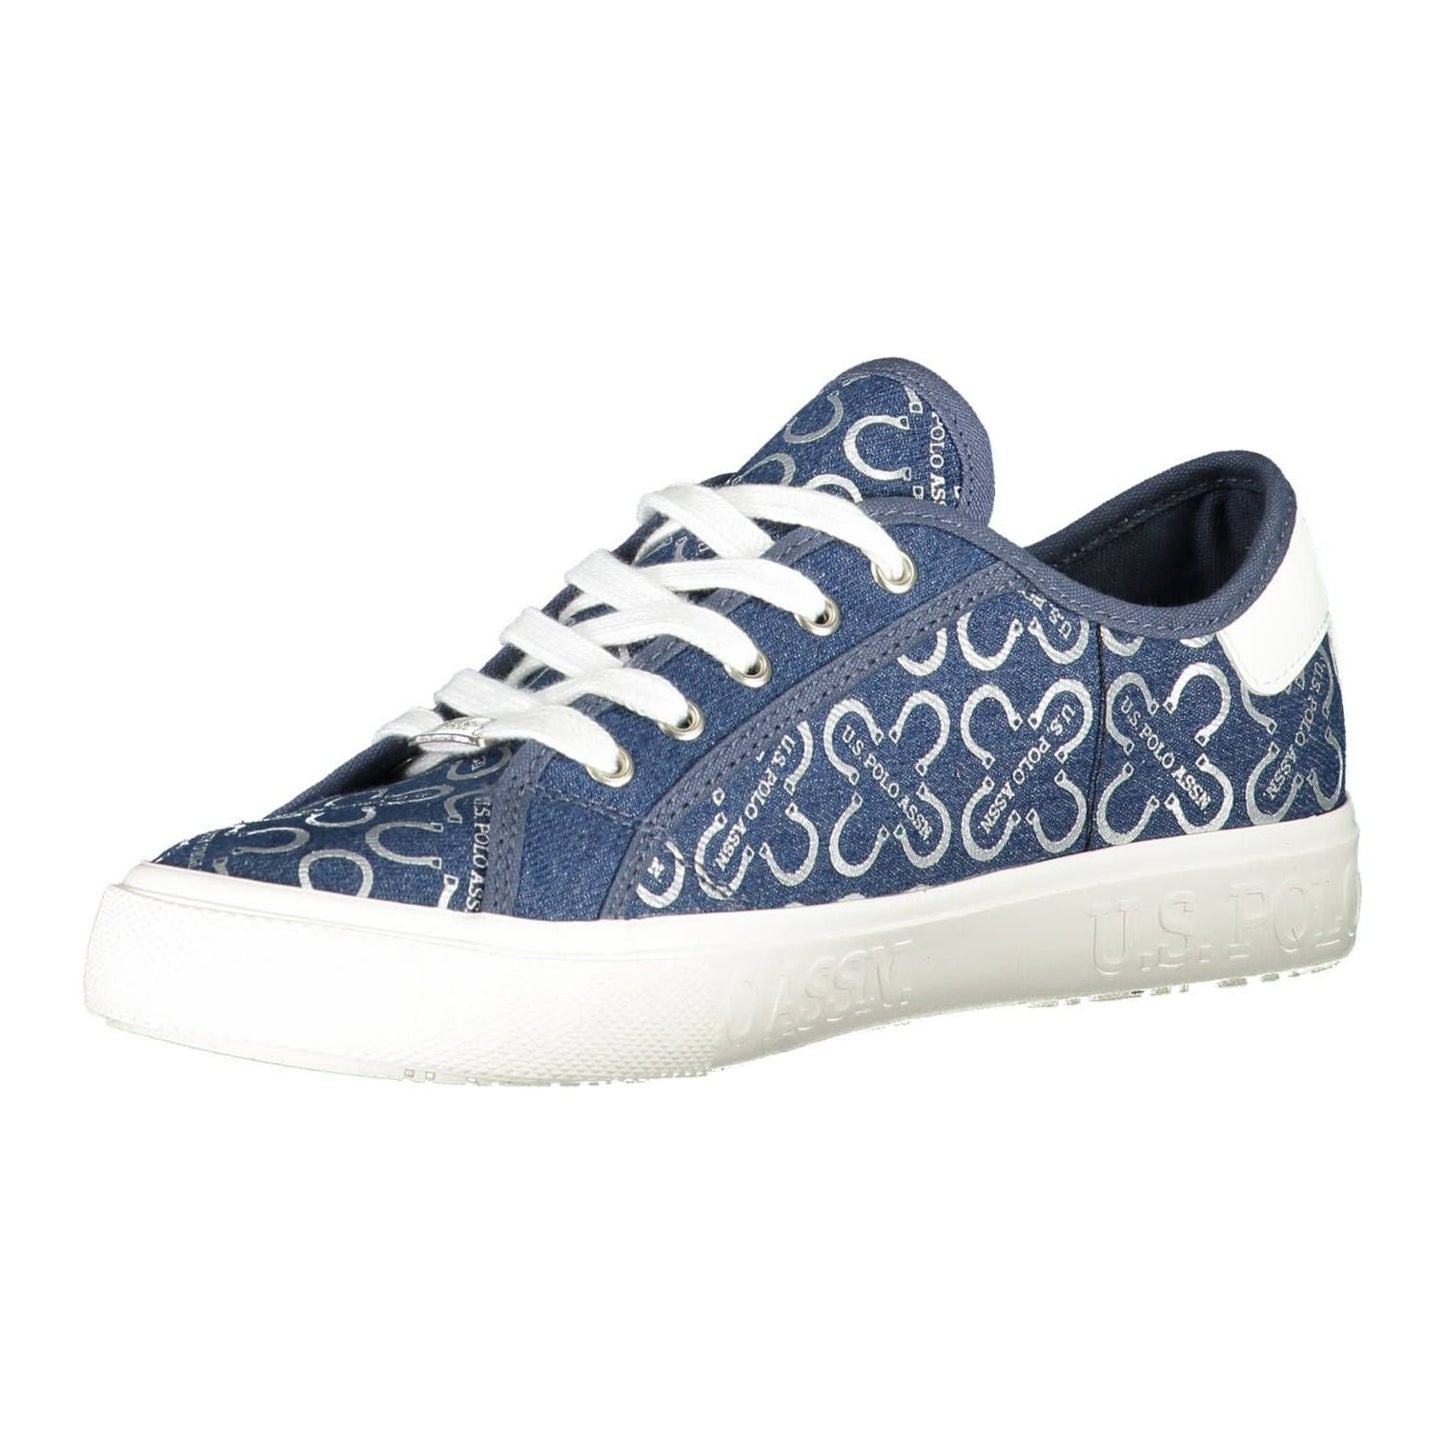 U.S. POLO ASSN. Chic Blue Lace-Up Sports Sneakers chic-blue-lace-up-sports-sneakers-1